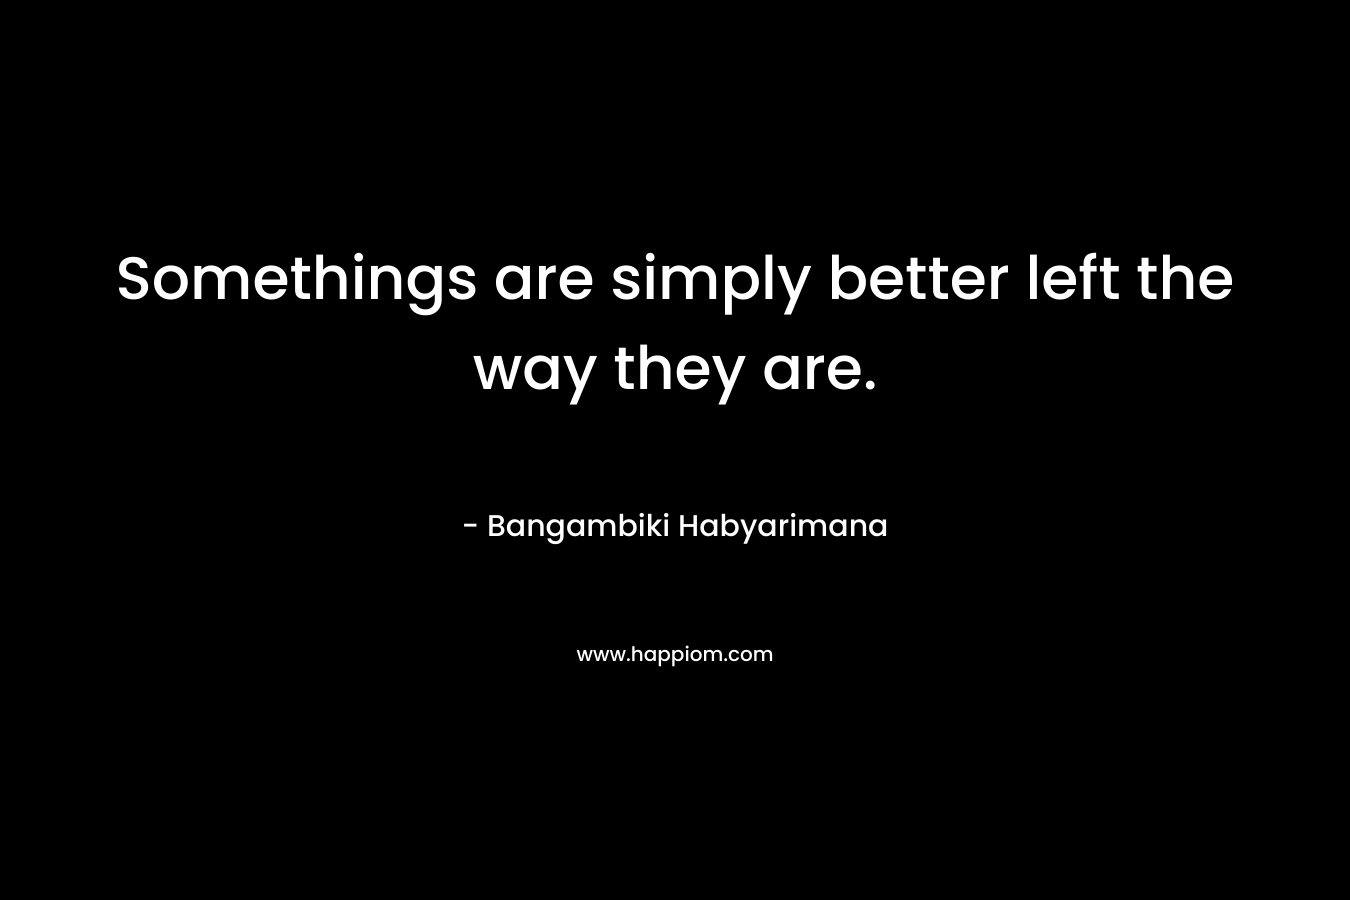 Somethings are simply better left the way they are.